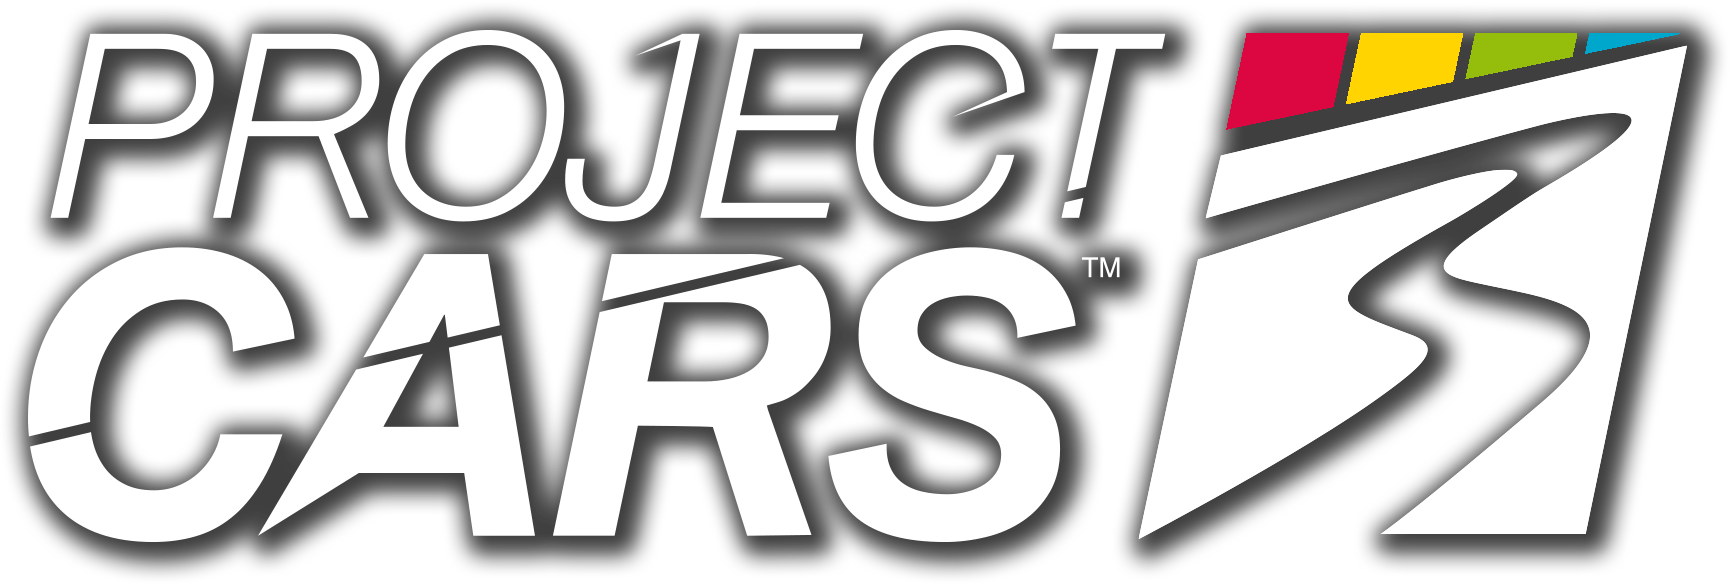 Steam Community :: Project CARS 3